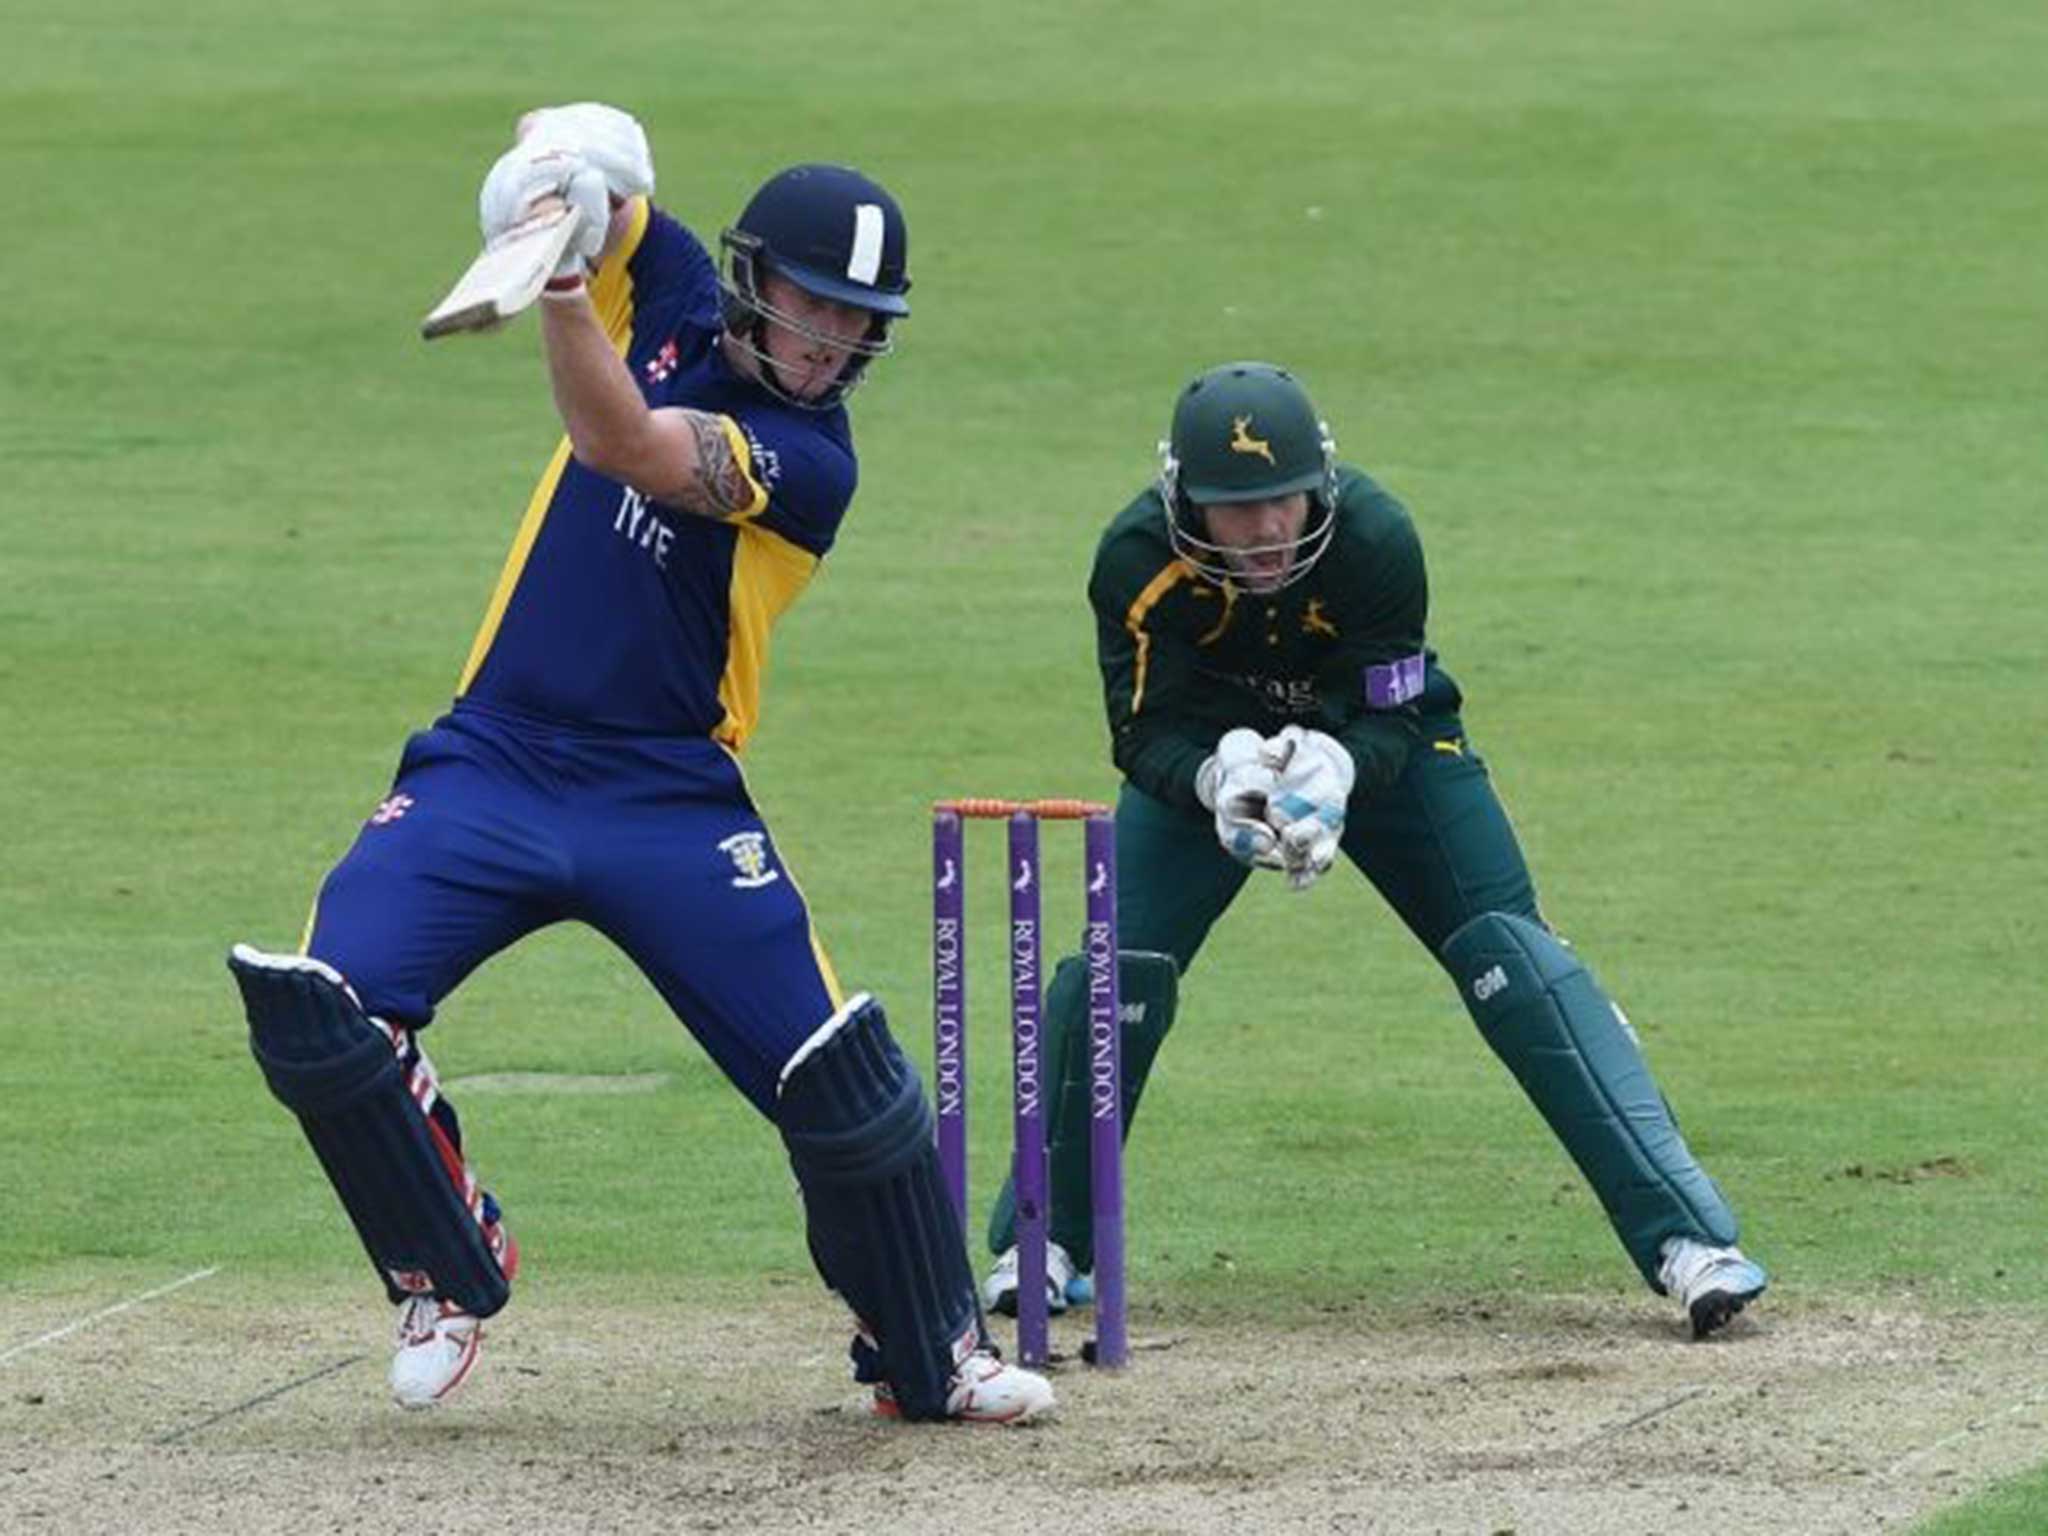 In full flow: Durham’s Ben Stokes on the attack during his magnificent century yesterday